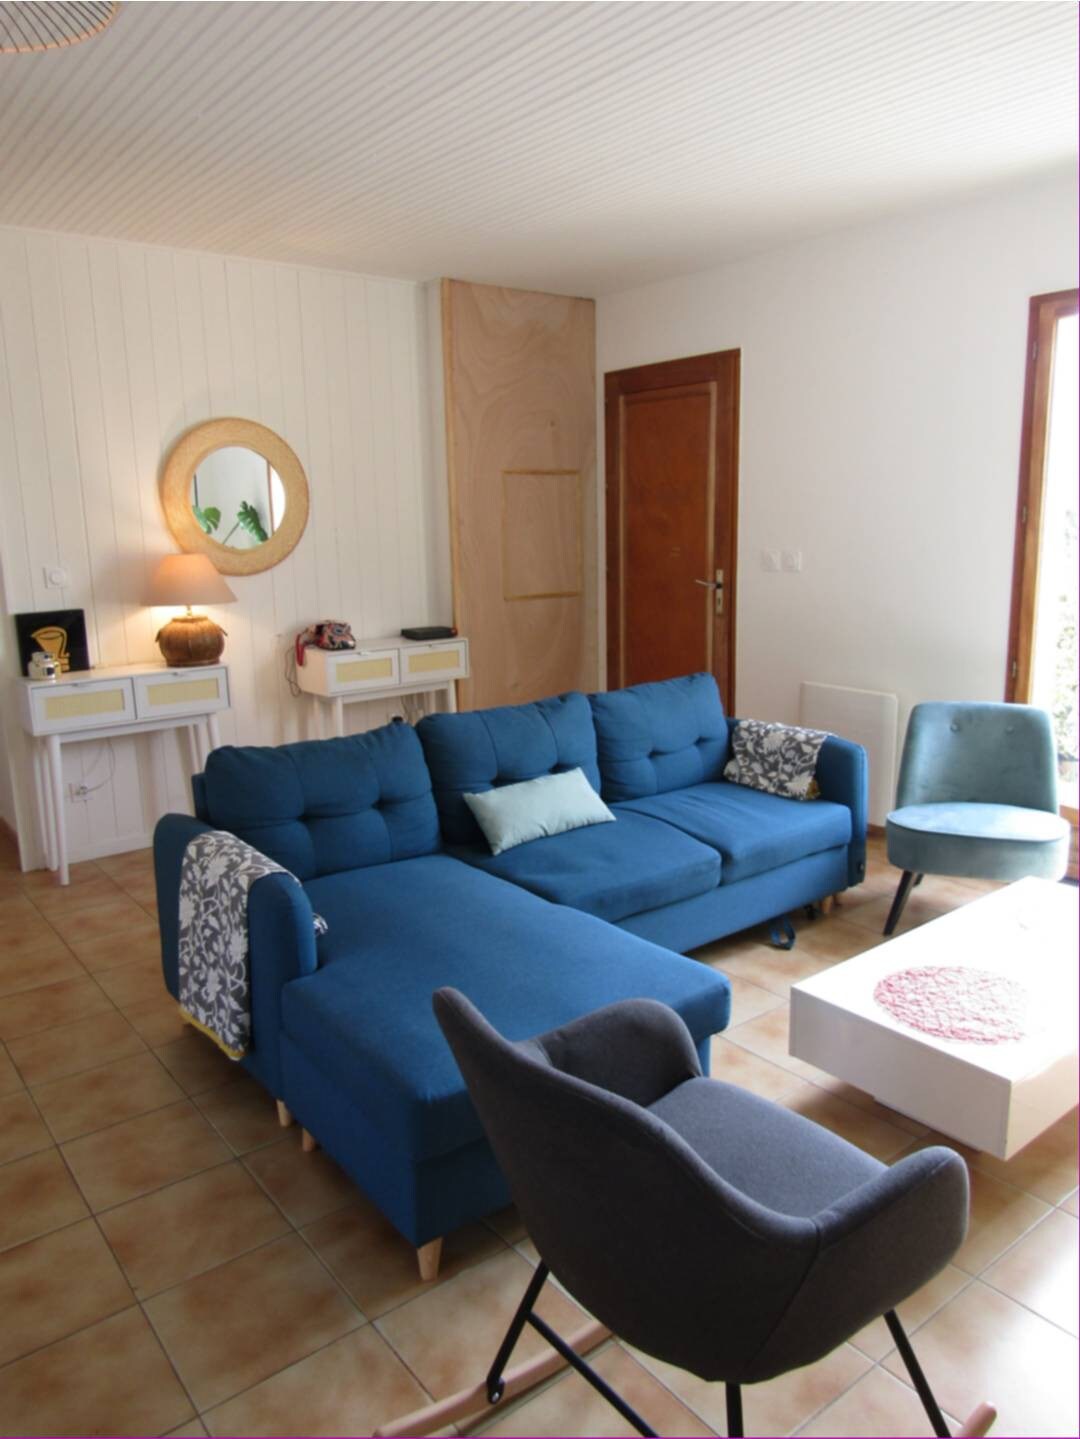 Pleasant spacious villa with swimming pool for 10 people near the lake of Lacanau